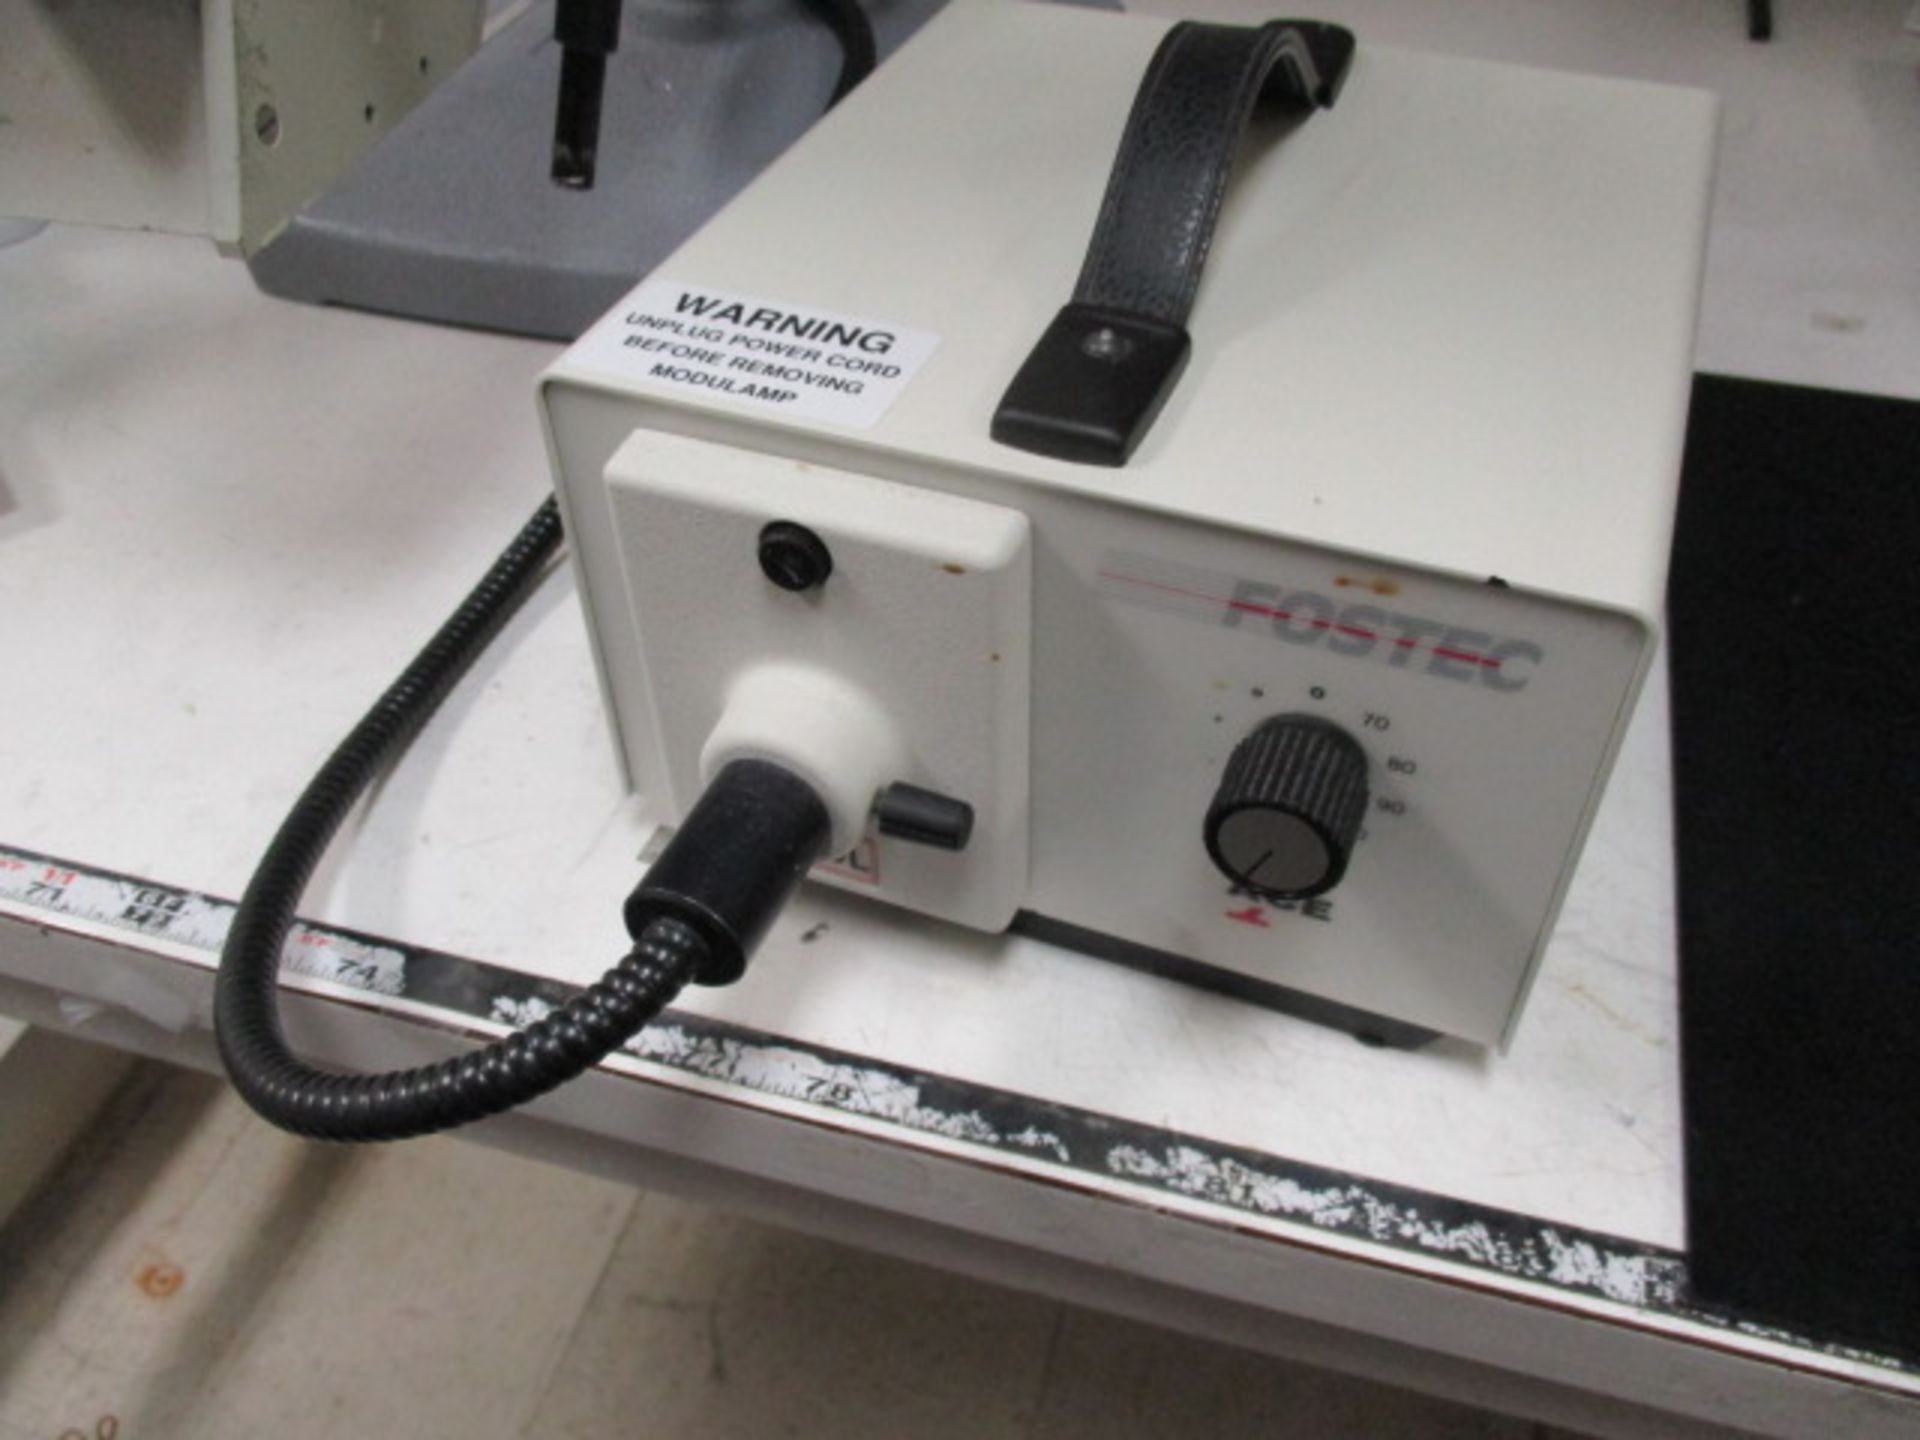 Meiji 0.7x-4.5x Stereozoom Microscope On AO Stand, With Fostec ACE/32597 Fiber Optic Light Source. - Image 3 of 3